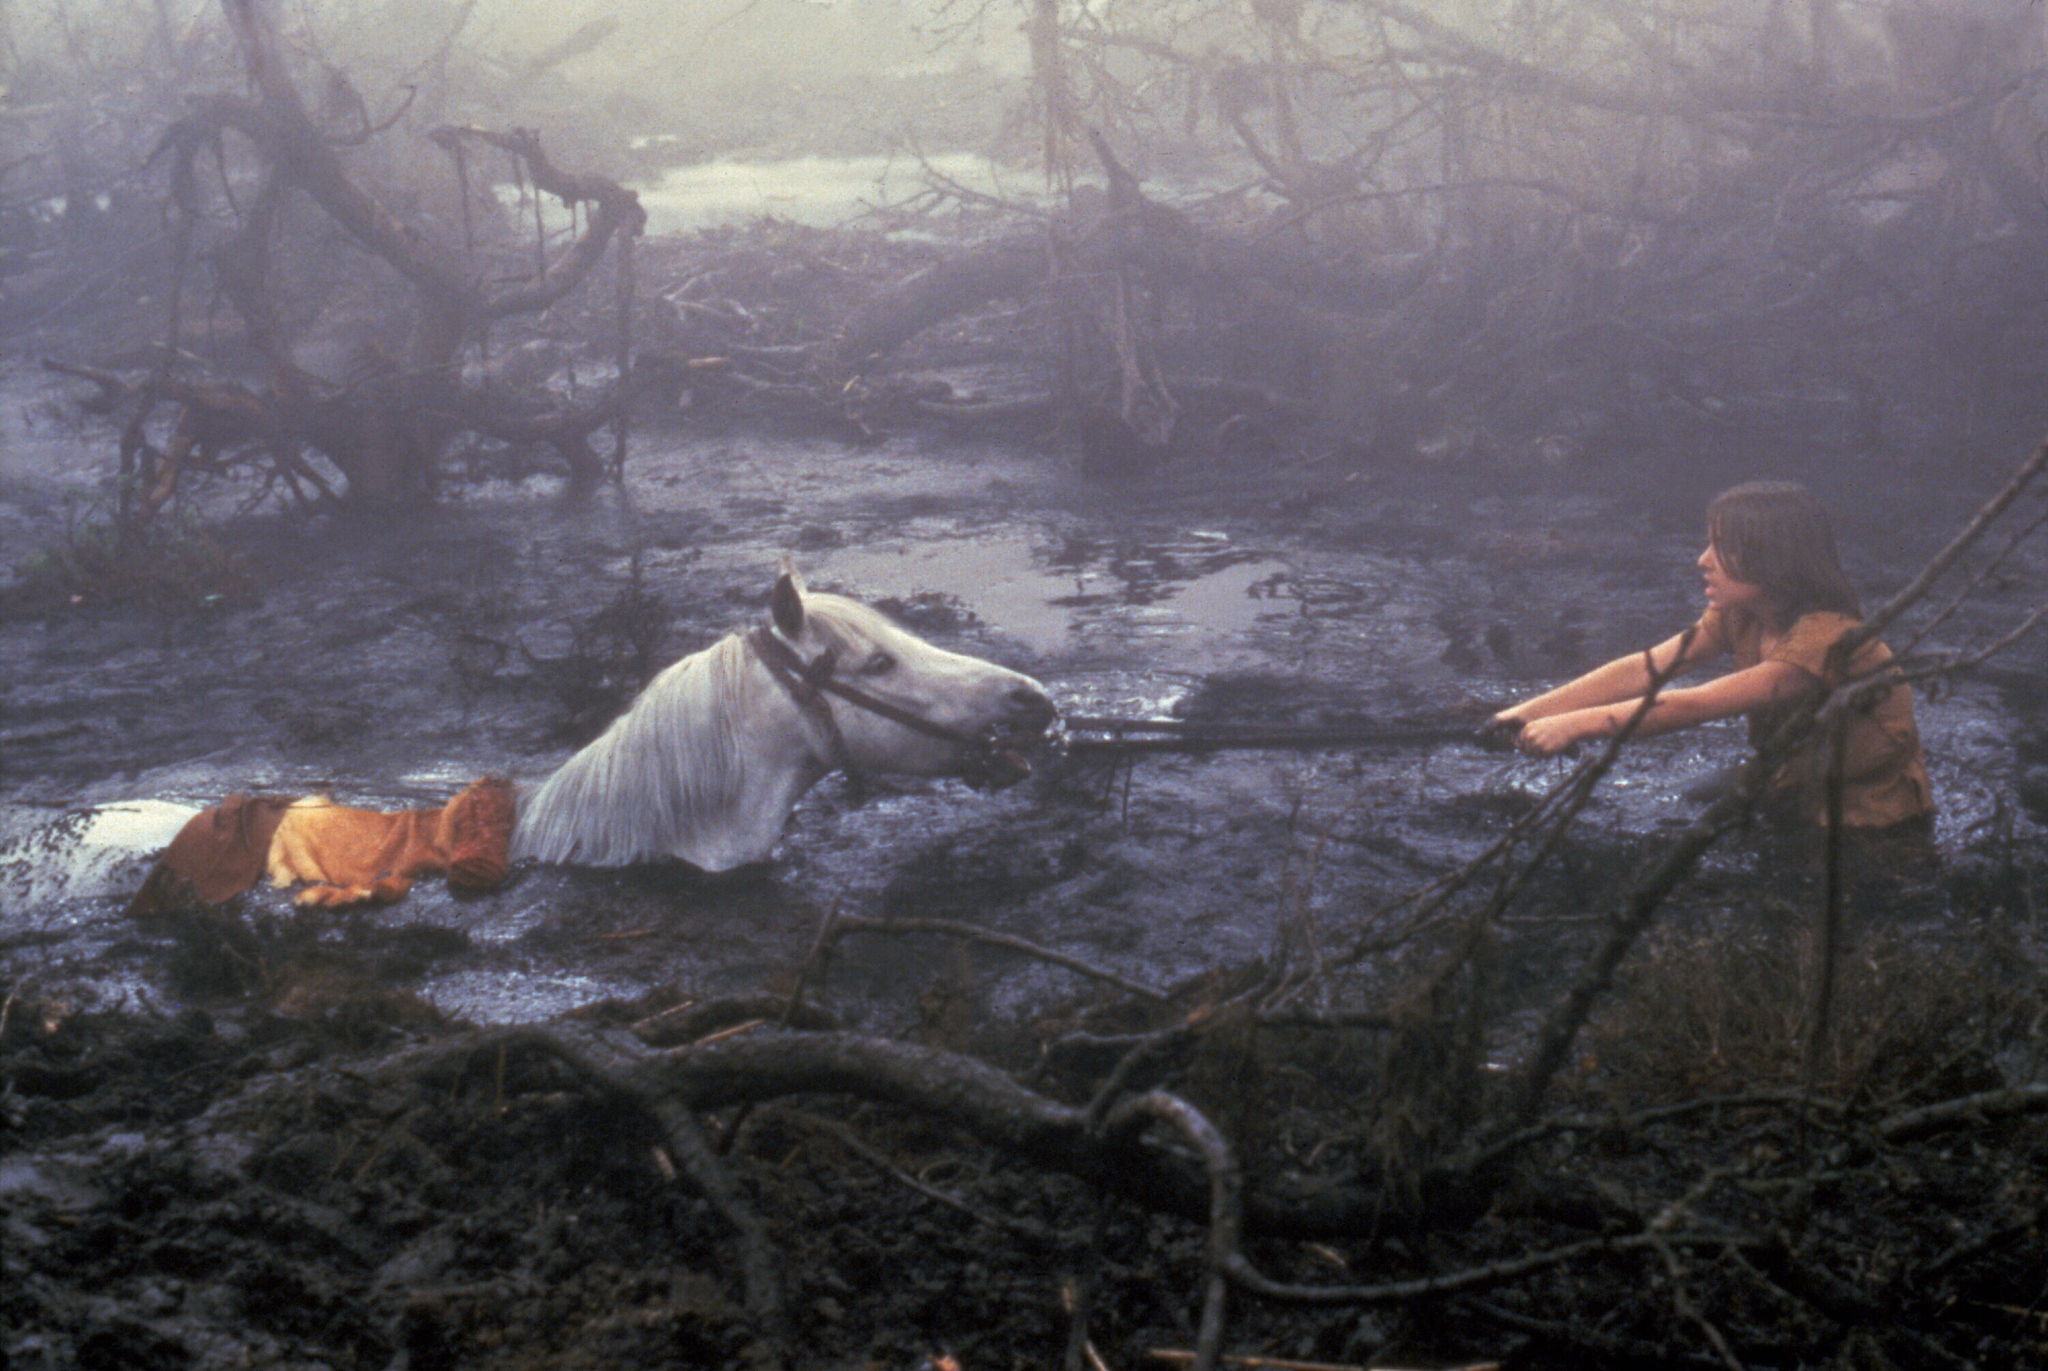 Still of Noah Hathaway in The NeverEnding Story (1984)